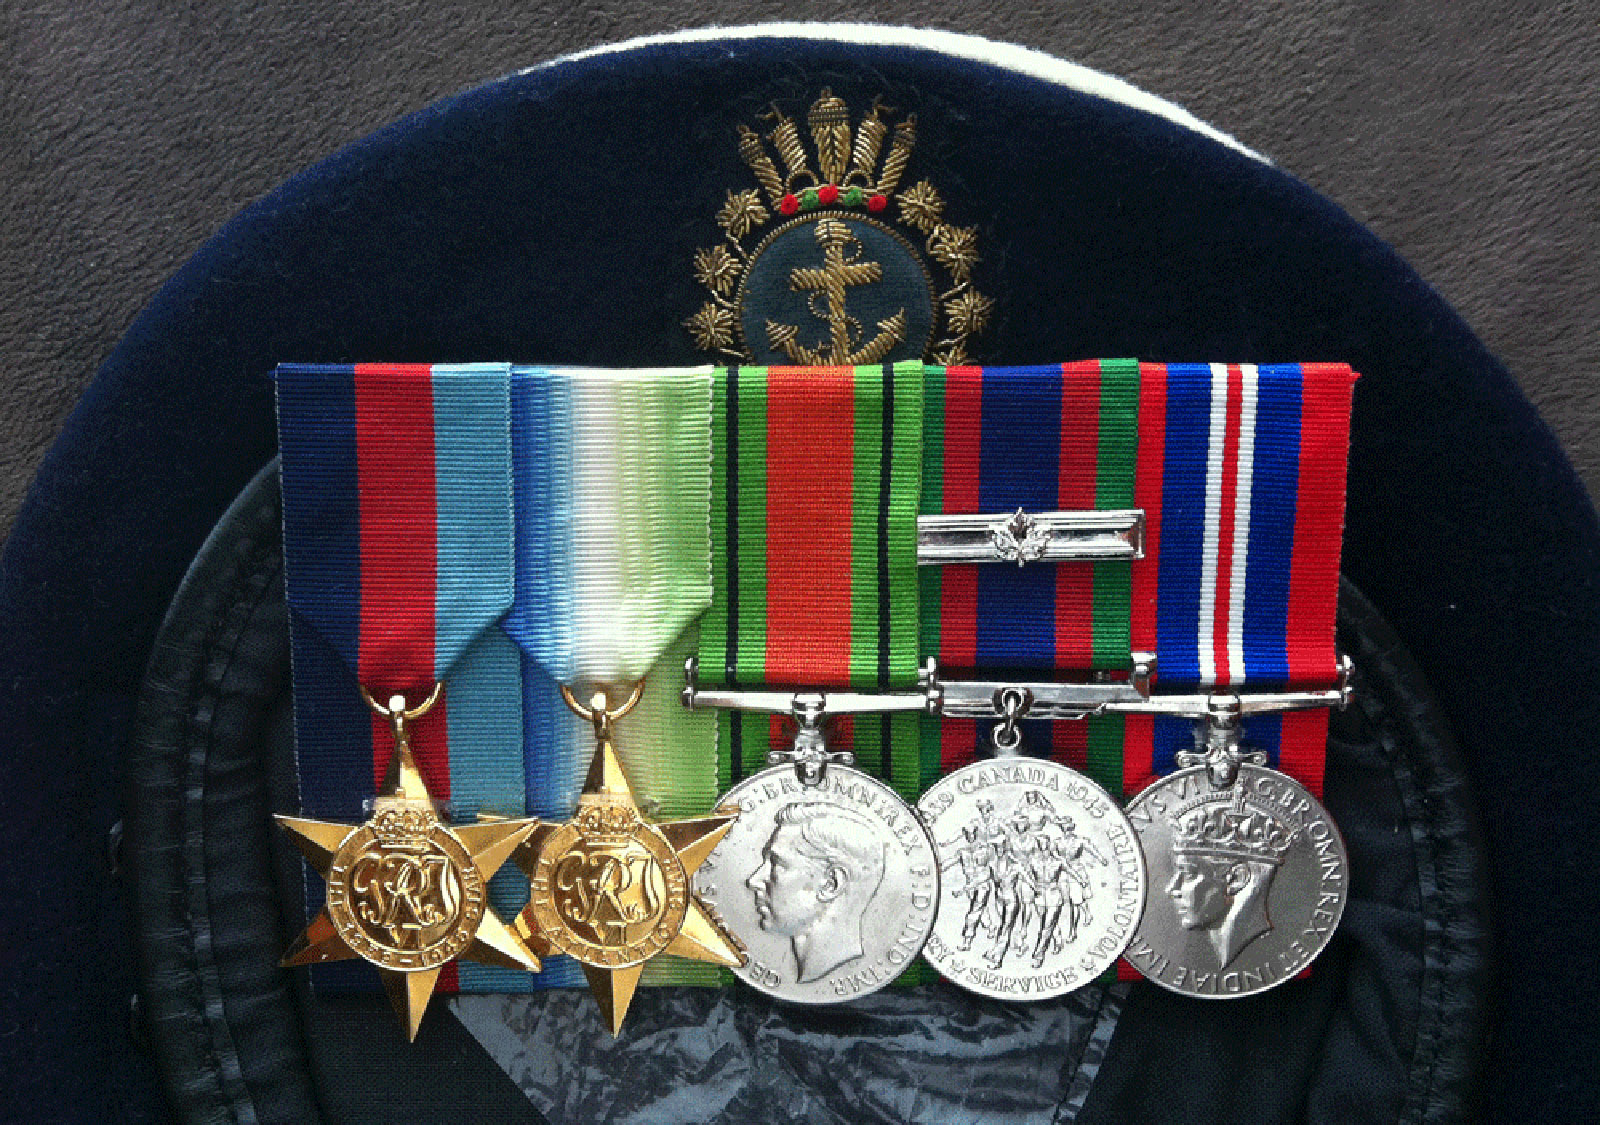 Medals received by AB Harrison F. Stumpf over the course of his duty.